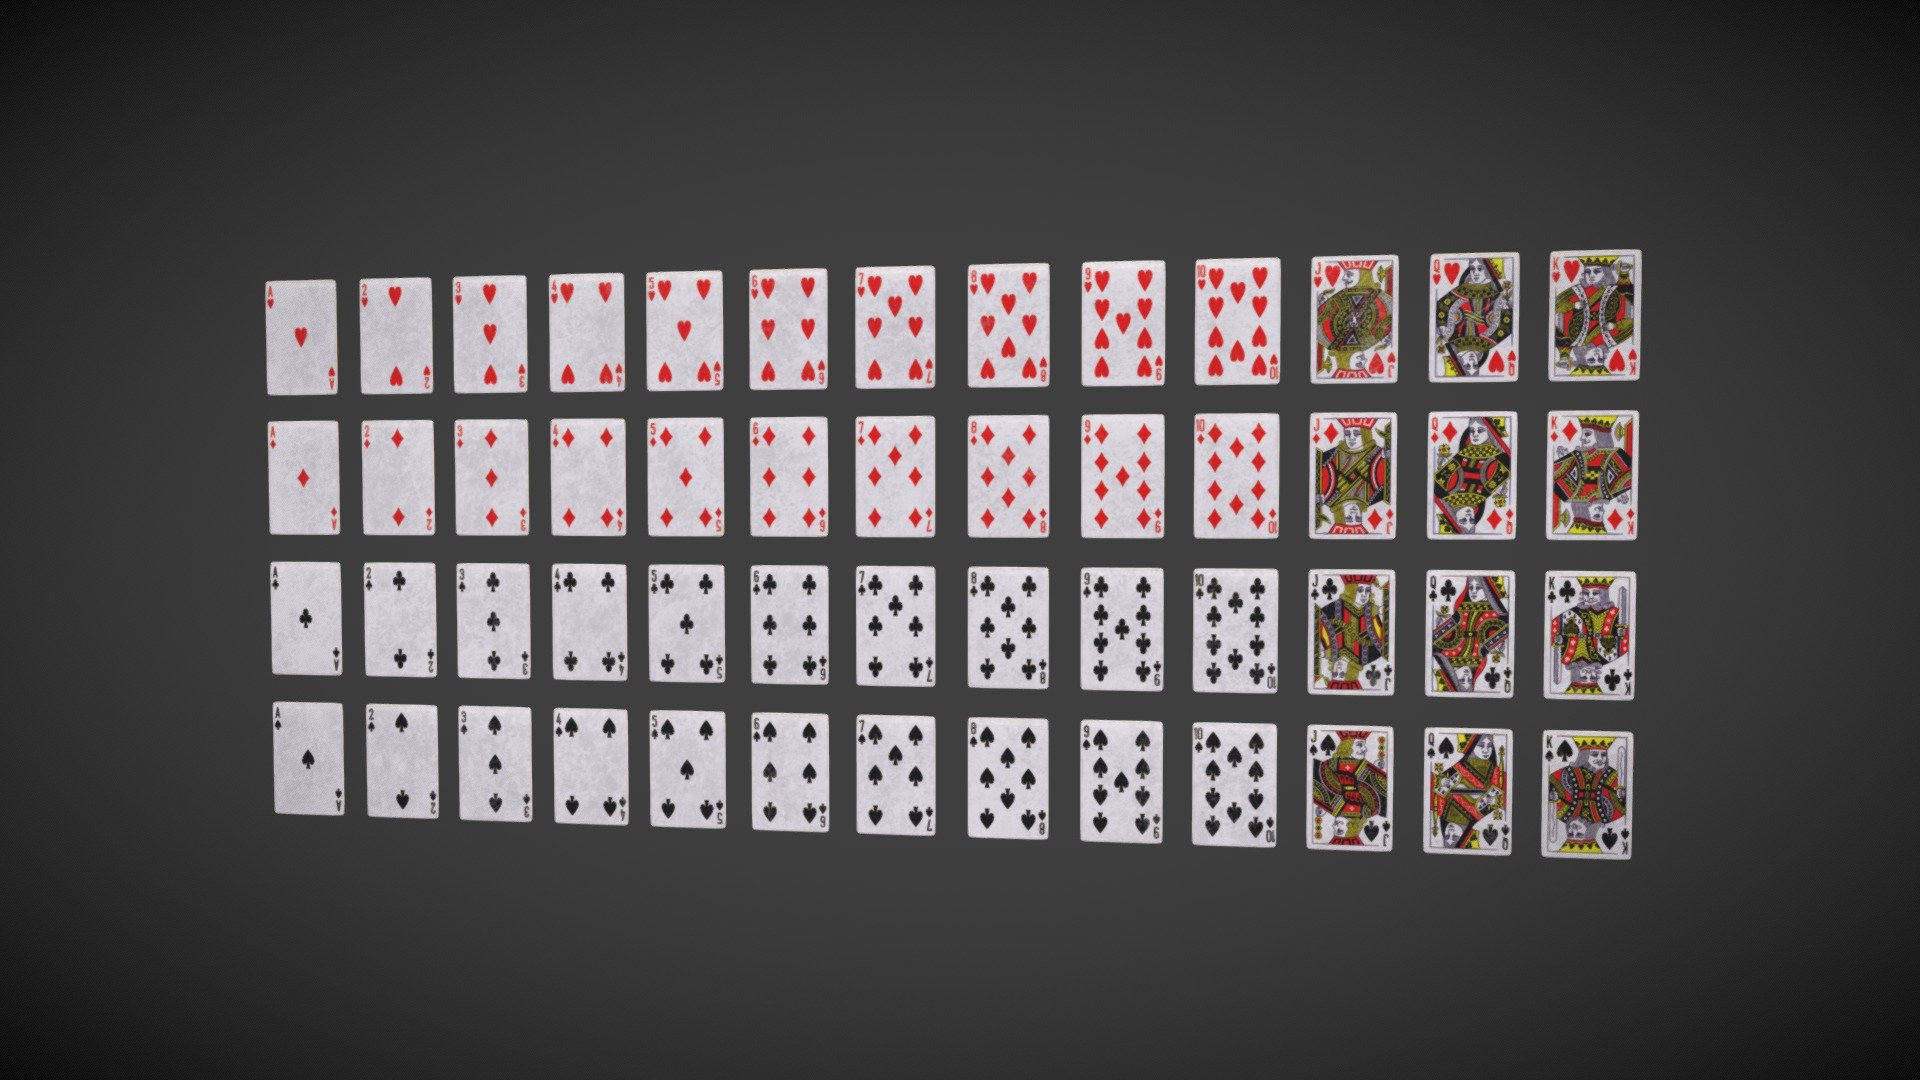 A set of 52 playing cards 3d model